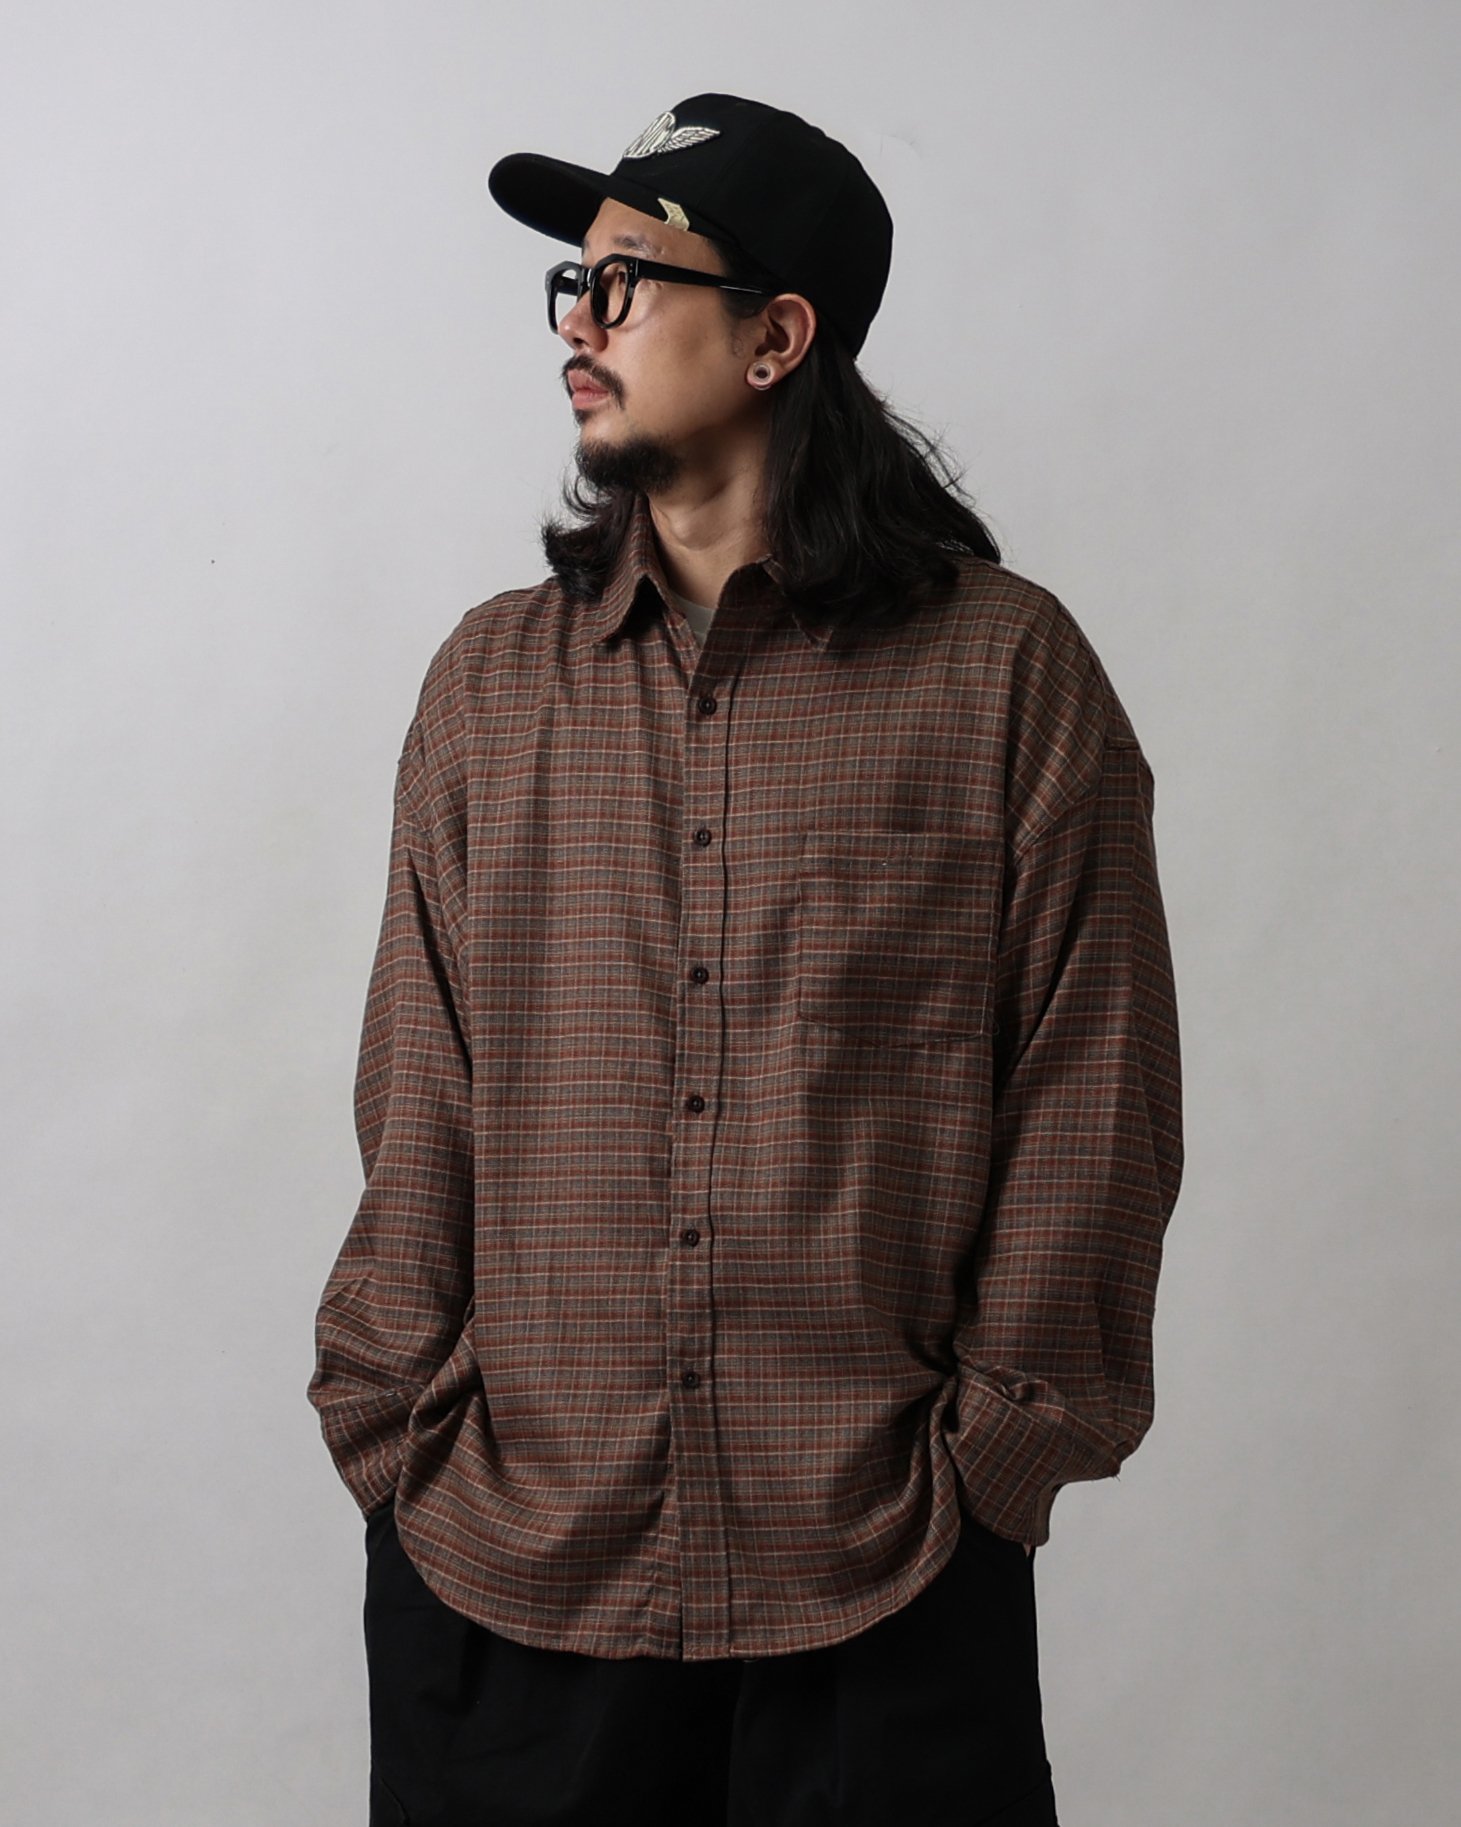 FITS 364 OLD Retro Check Over Shirts (Olive Charcoal/Brick)